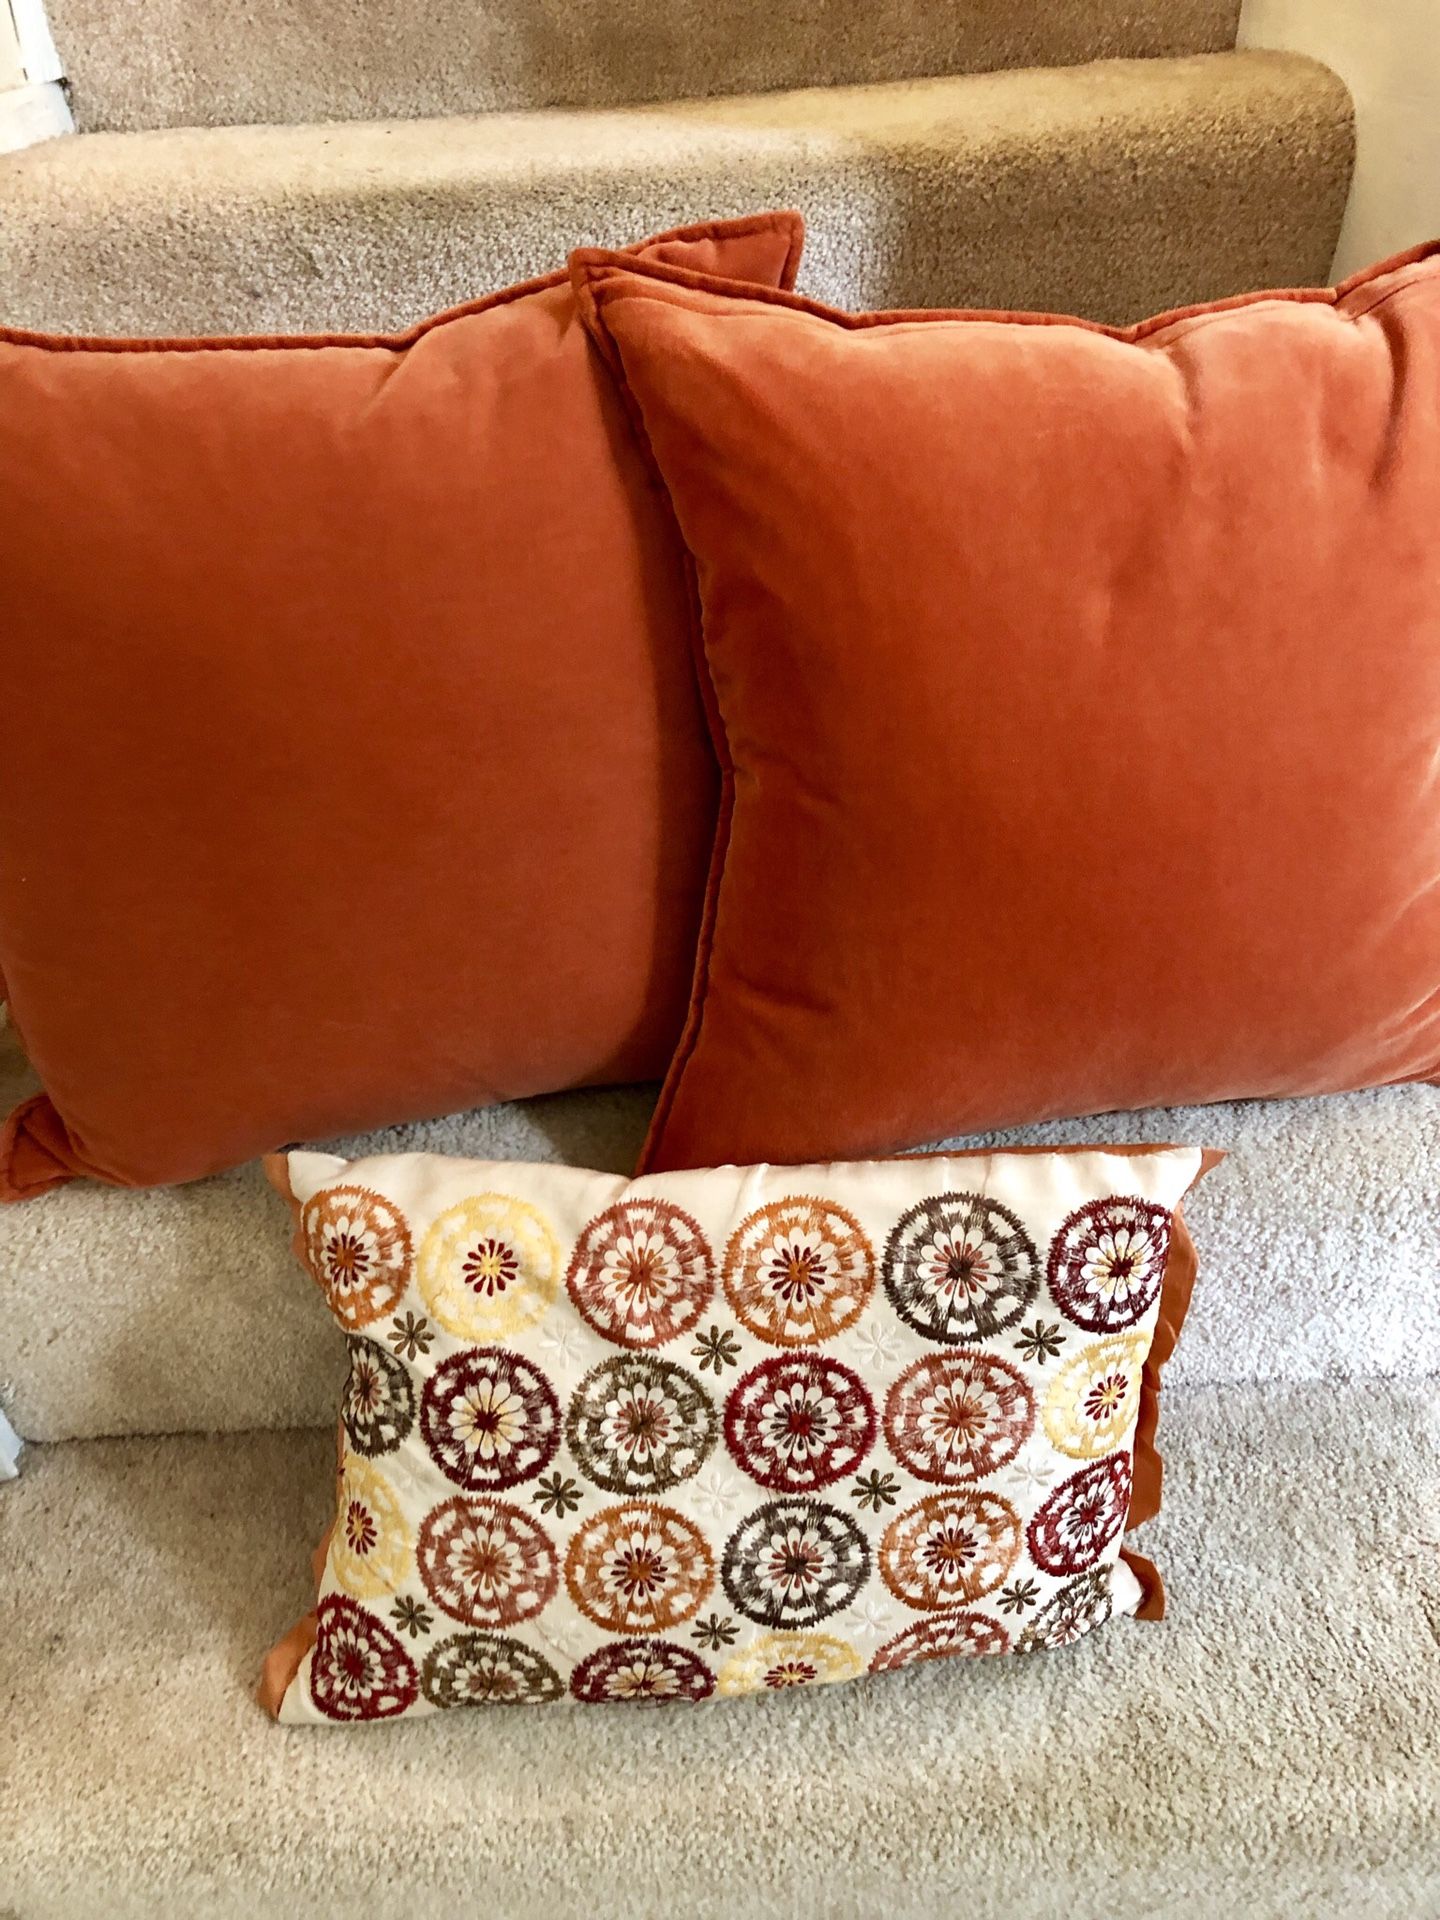 MOVING SALE. Couch pillows